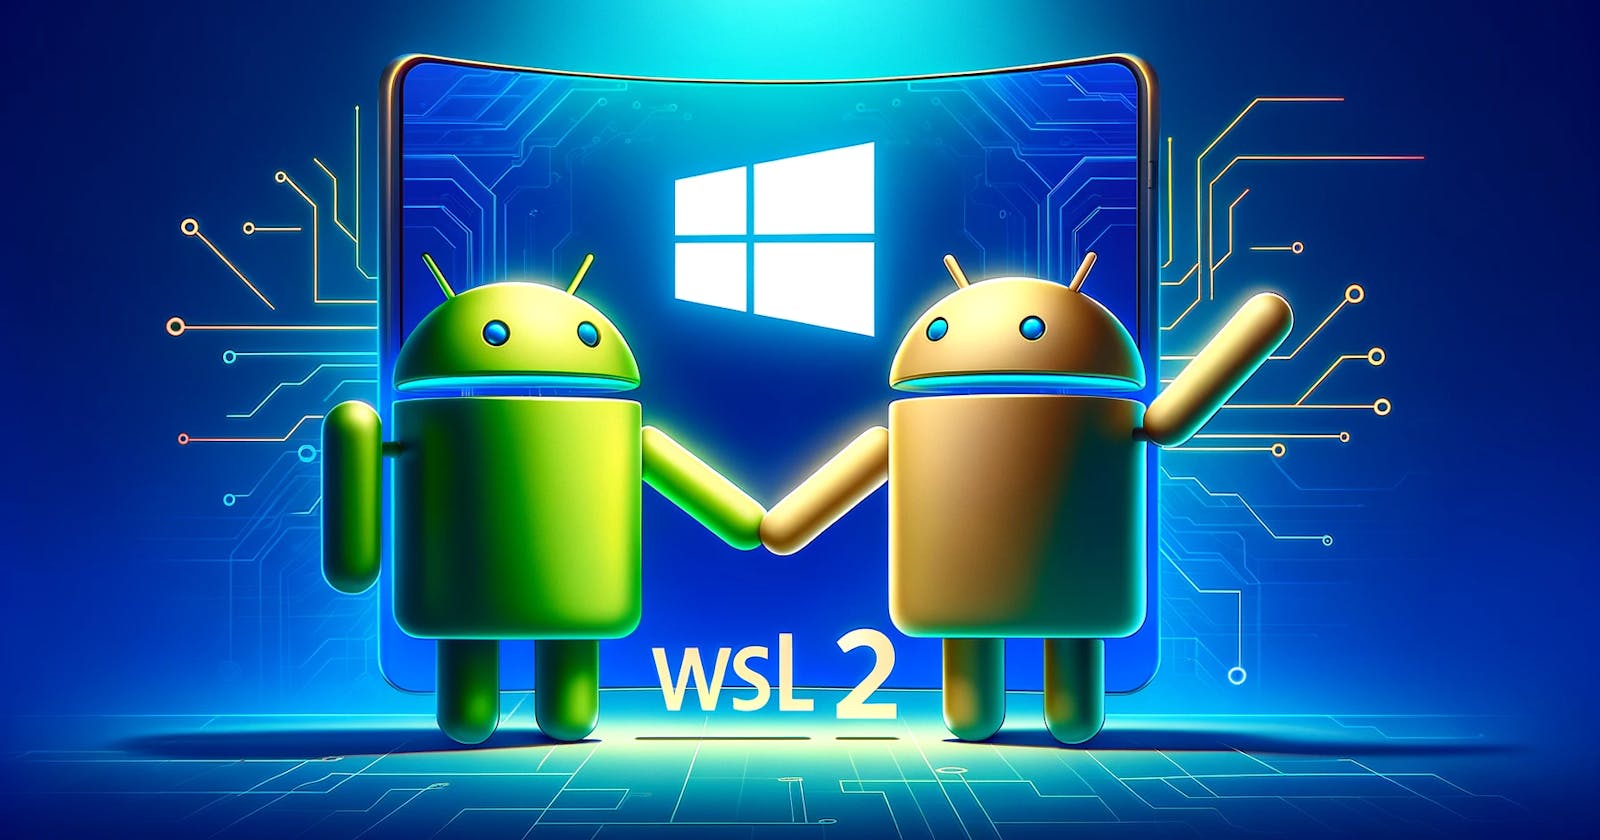 Setting Up Android Development Environment on WSL 2